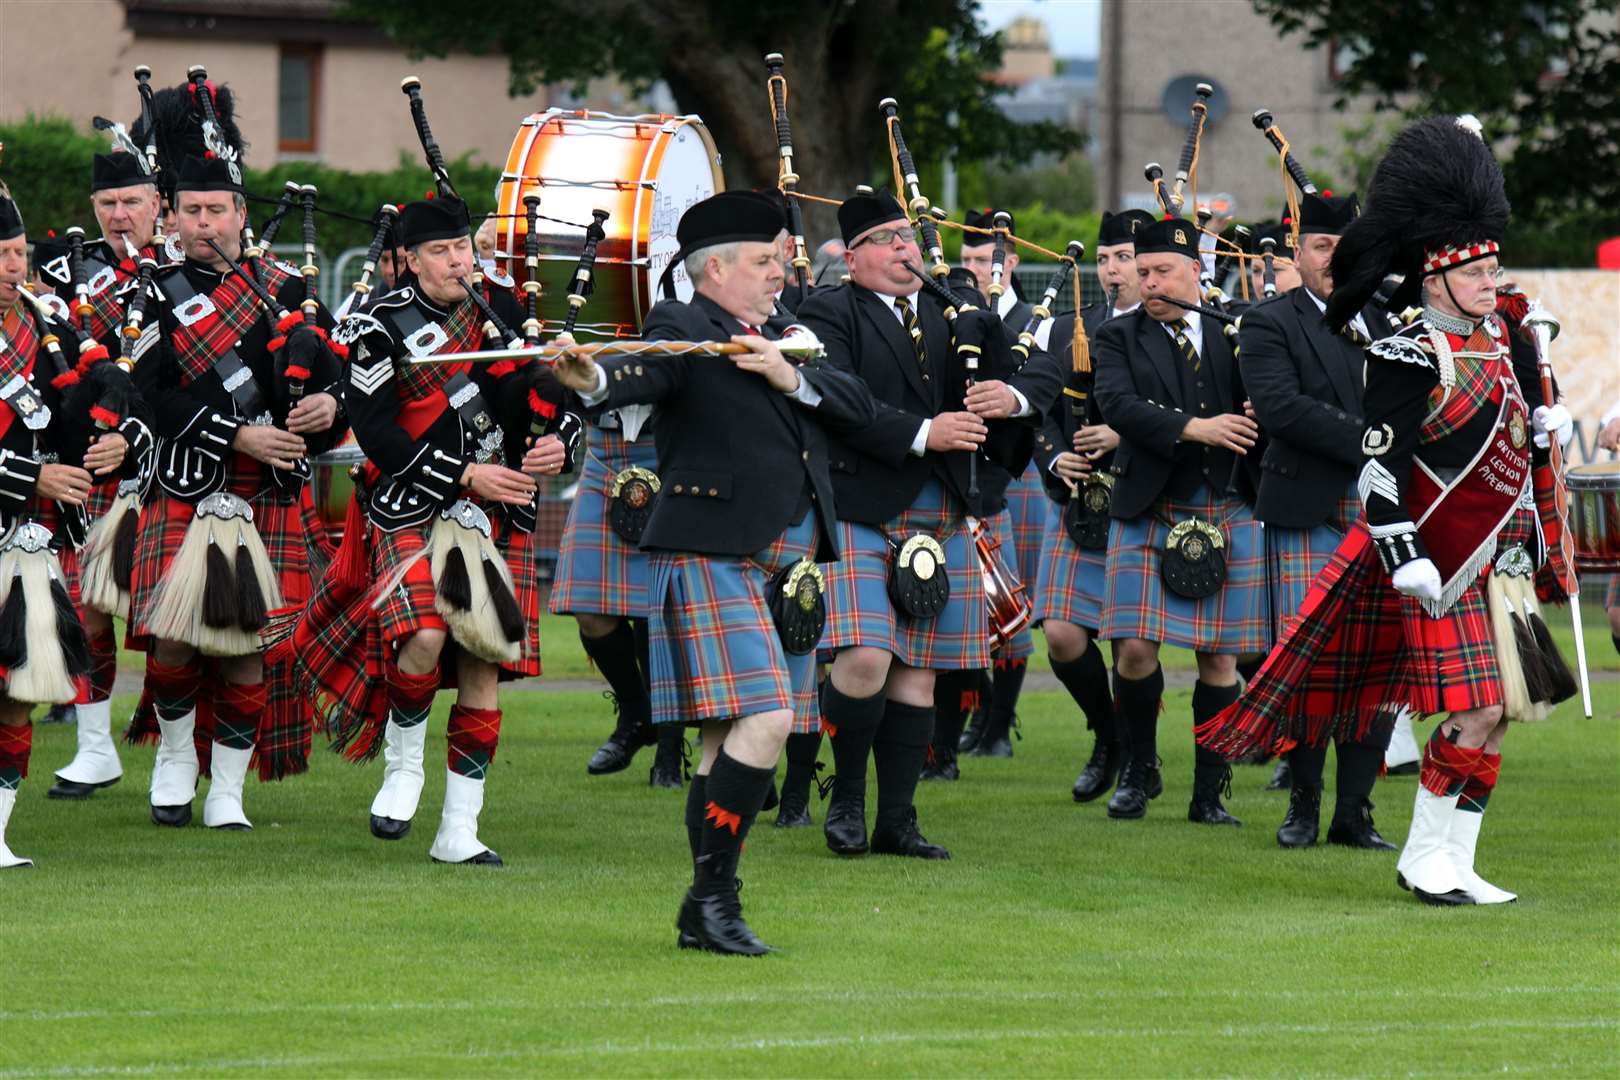 Inverness Highland Games will not take place this year.